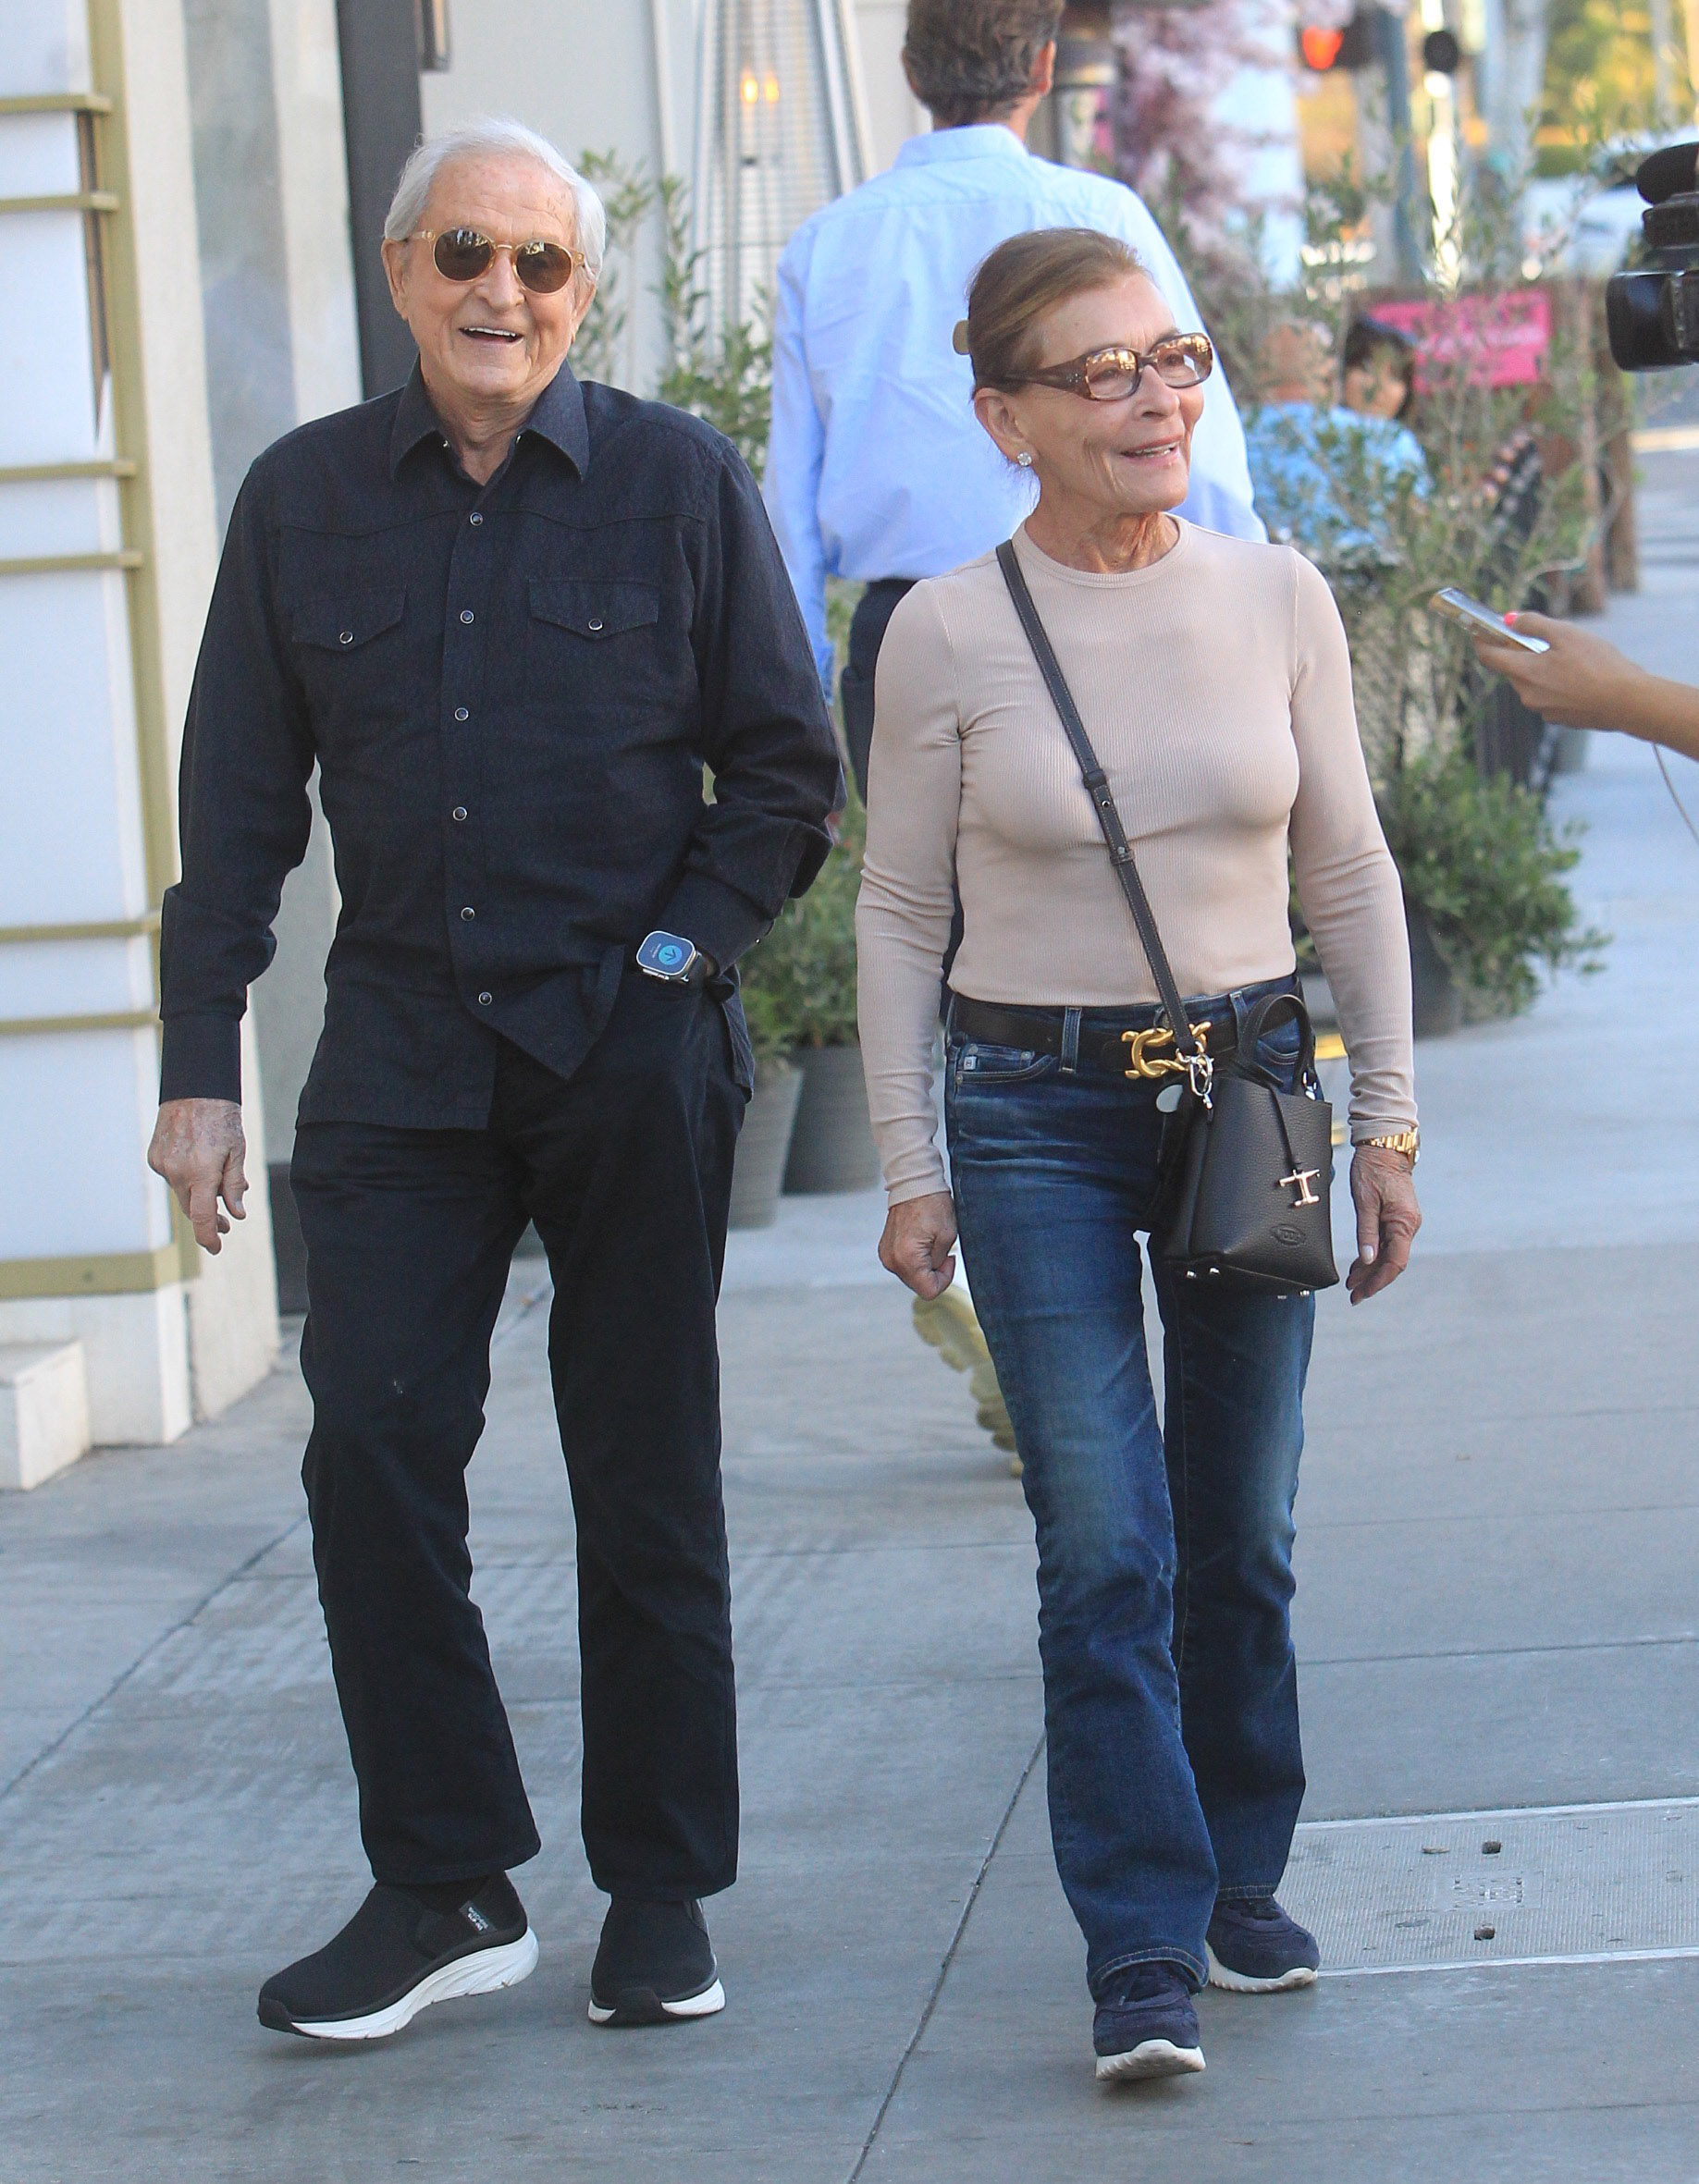 Judy Sheindlin and Jerry Sheindlin on November 22, 2022 in Los Angeles, California. | Source: Getty Images